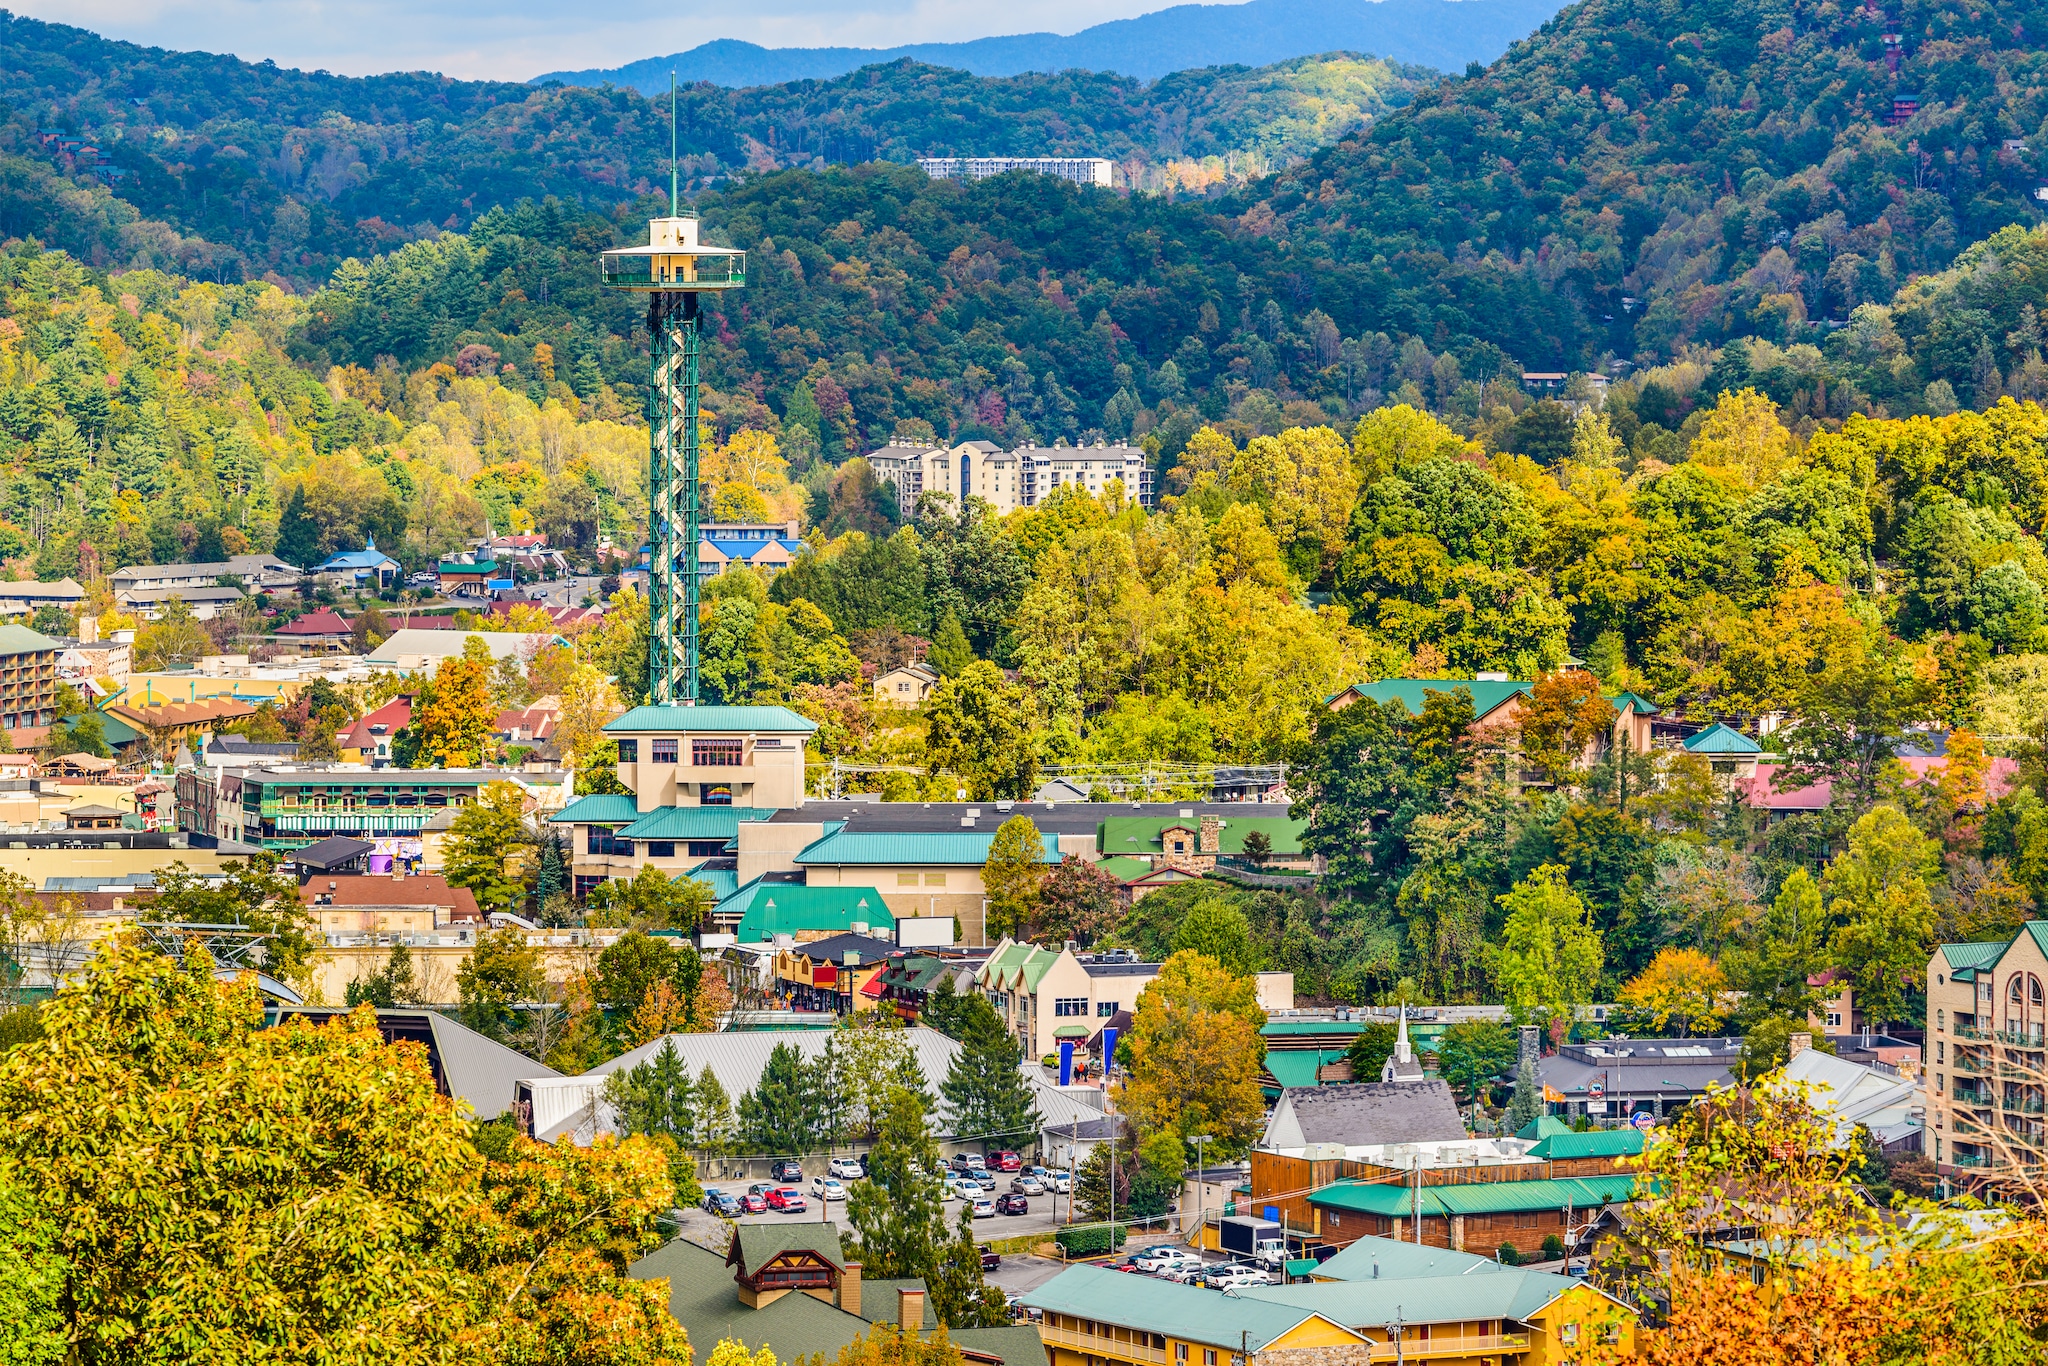 Gatlinburg, Tenn., a scenic mountain town with a large tourism industry, was devastated by wildfires that tore through the area without warning in late 2016.